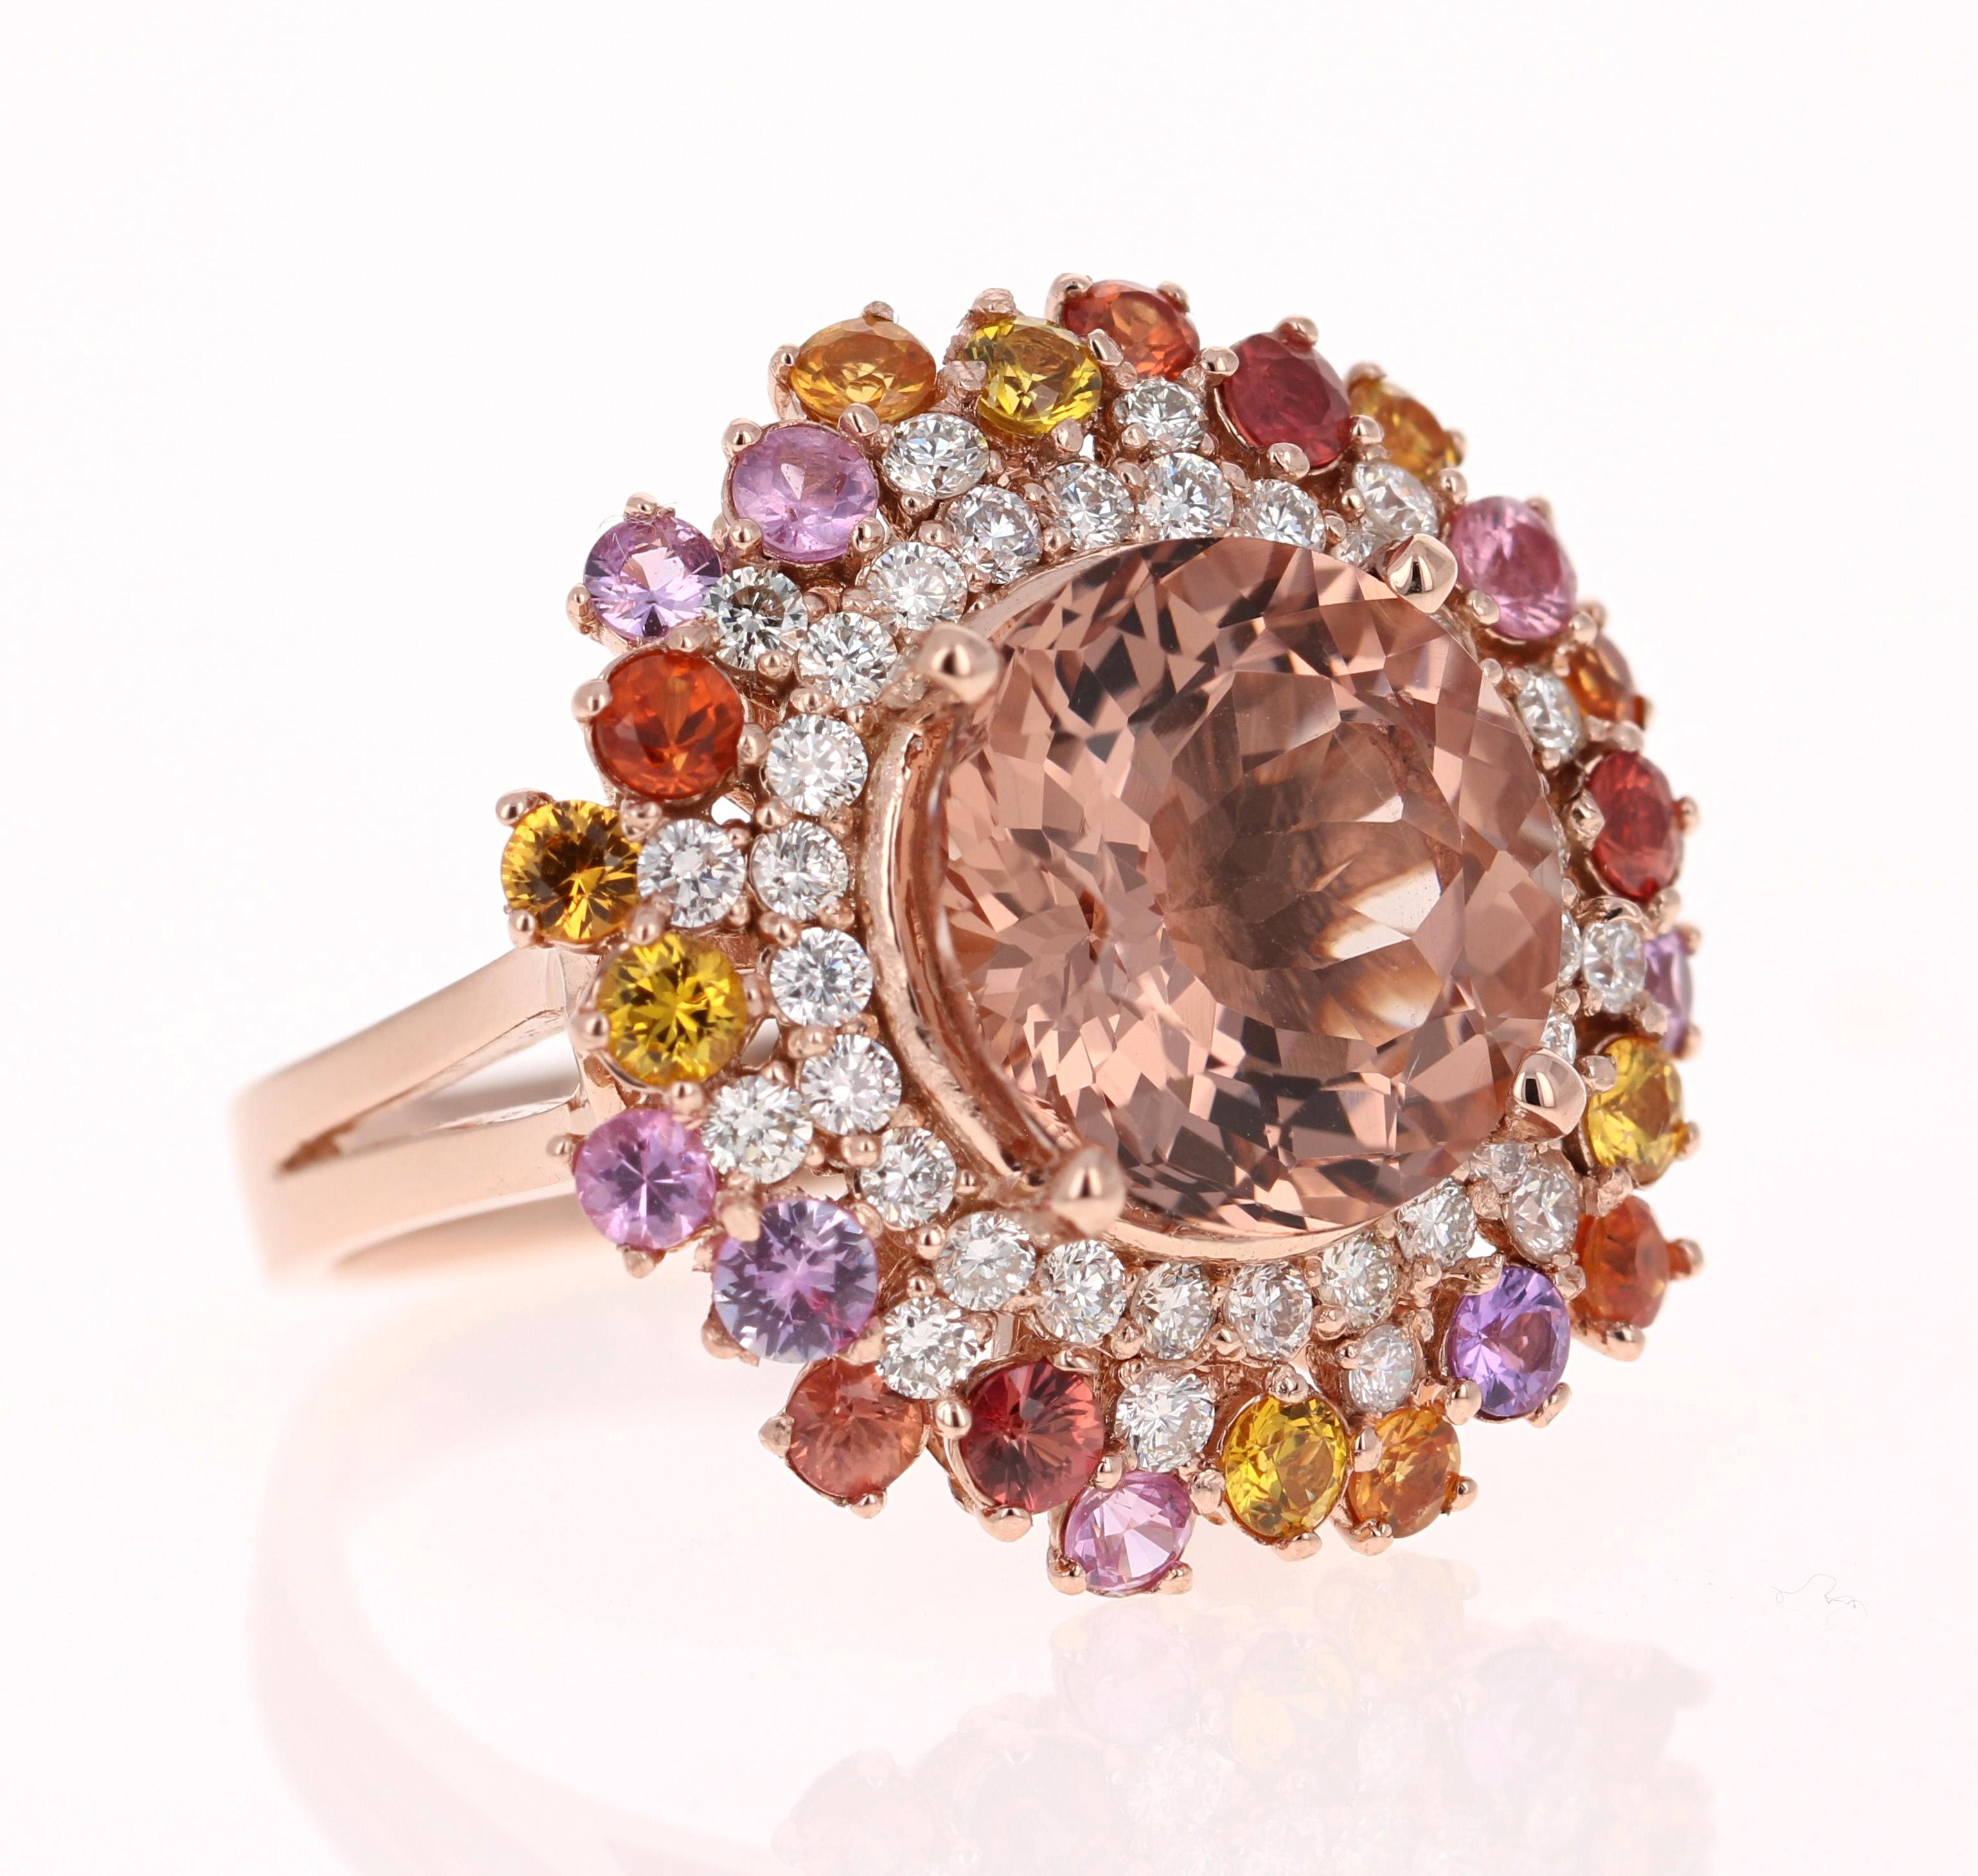 This gorgeous and unique Morganite Sapphire Diamond Ring has a 6.11 Carat Round Cut Morganite which is surrounded by Multi Colored Sapphires that weigh 1.80 Carats. It is further accented with 36 Round Cut Diamonds that weigh 0.83 Carats (Clarity: